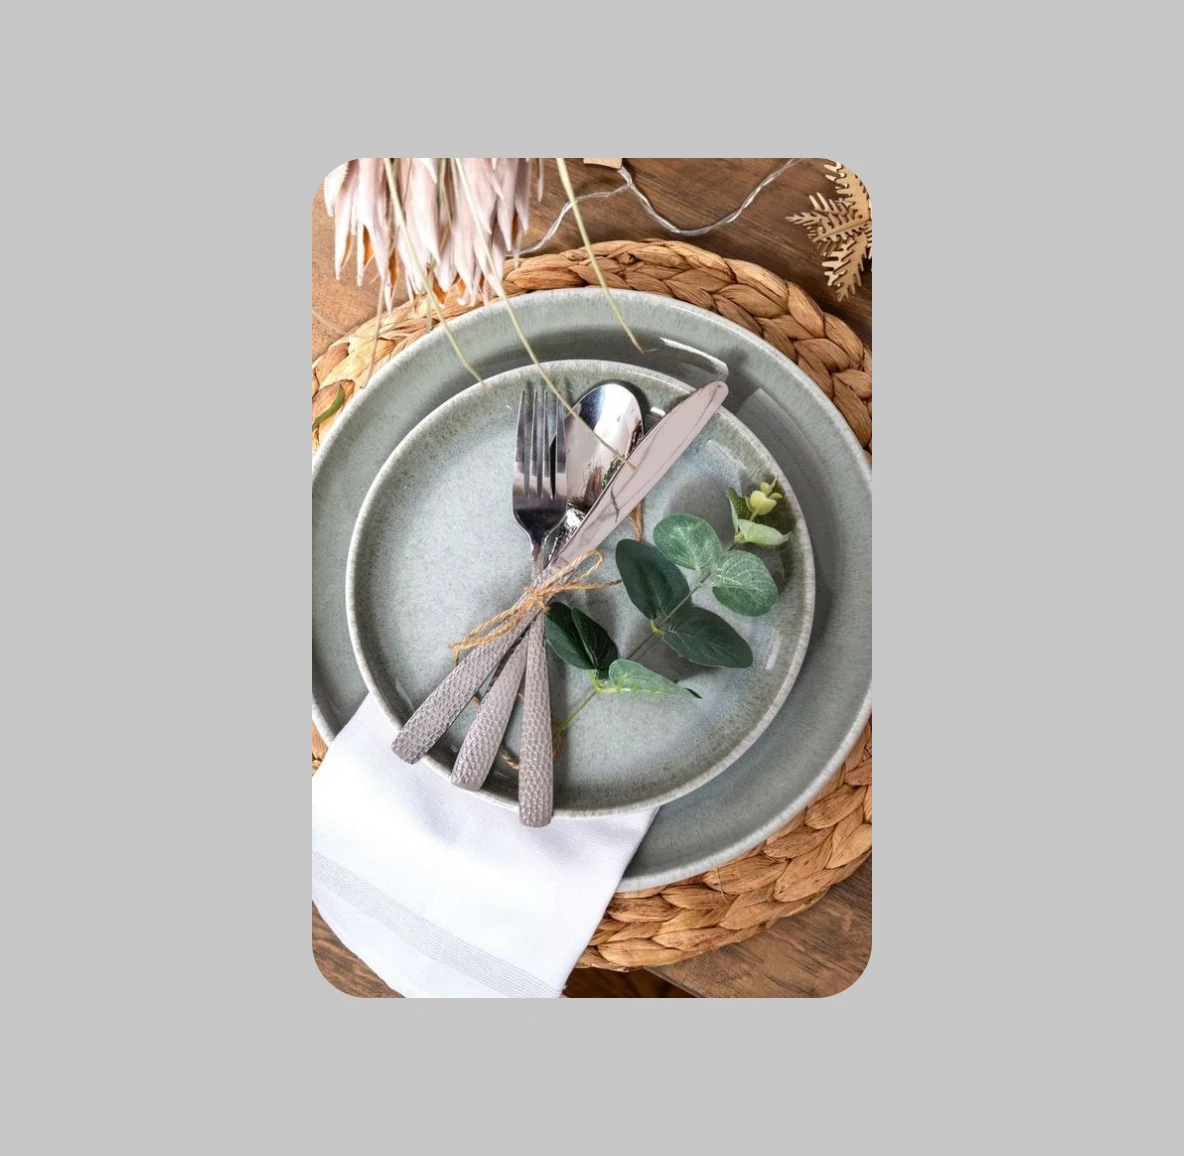 A set of silverware—including a spoon, knife and fork—wrapped in twine and a sprig of eucalyptus is placed on top of two, matching light green plates. Beneath the plates is a woven, wooden circular placemat and a white paper napkin. 